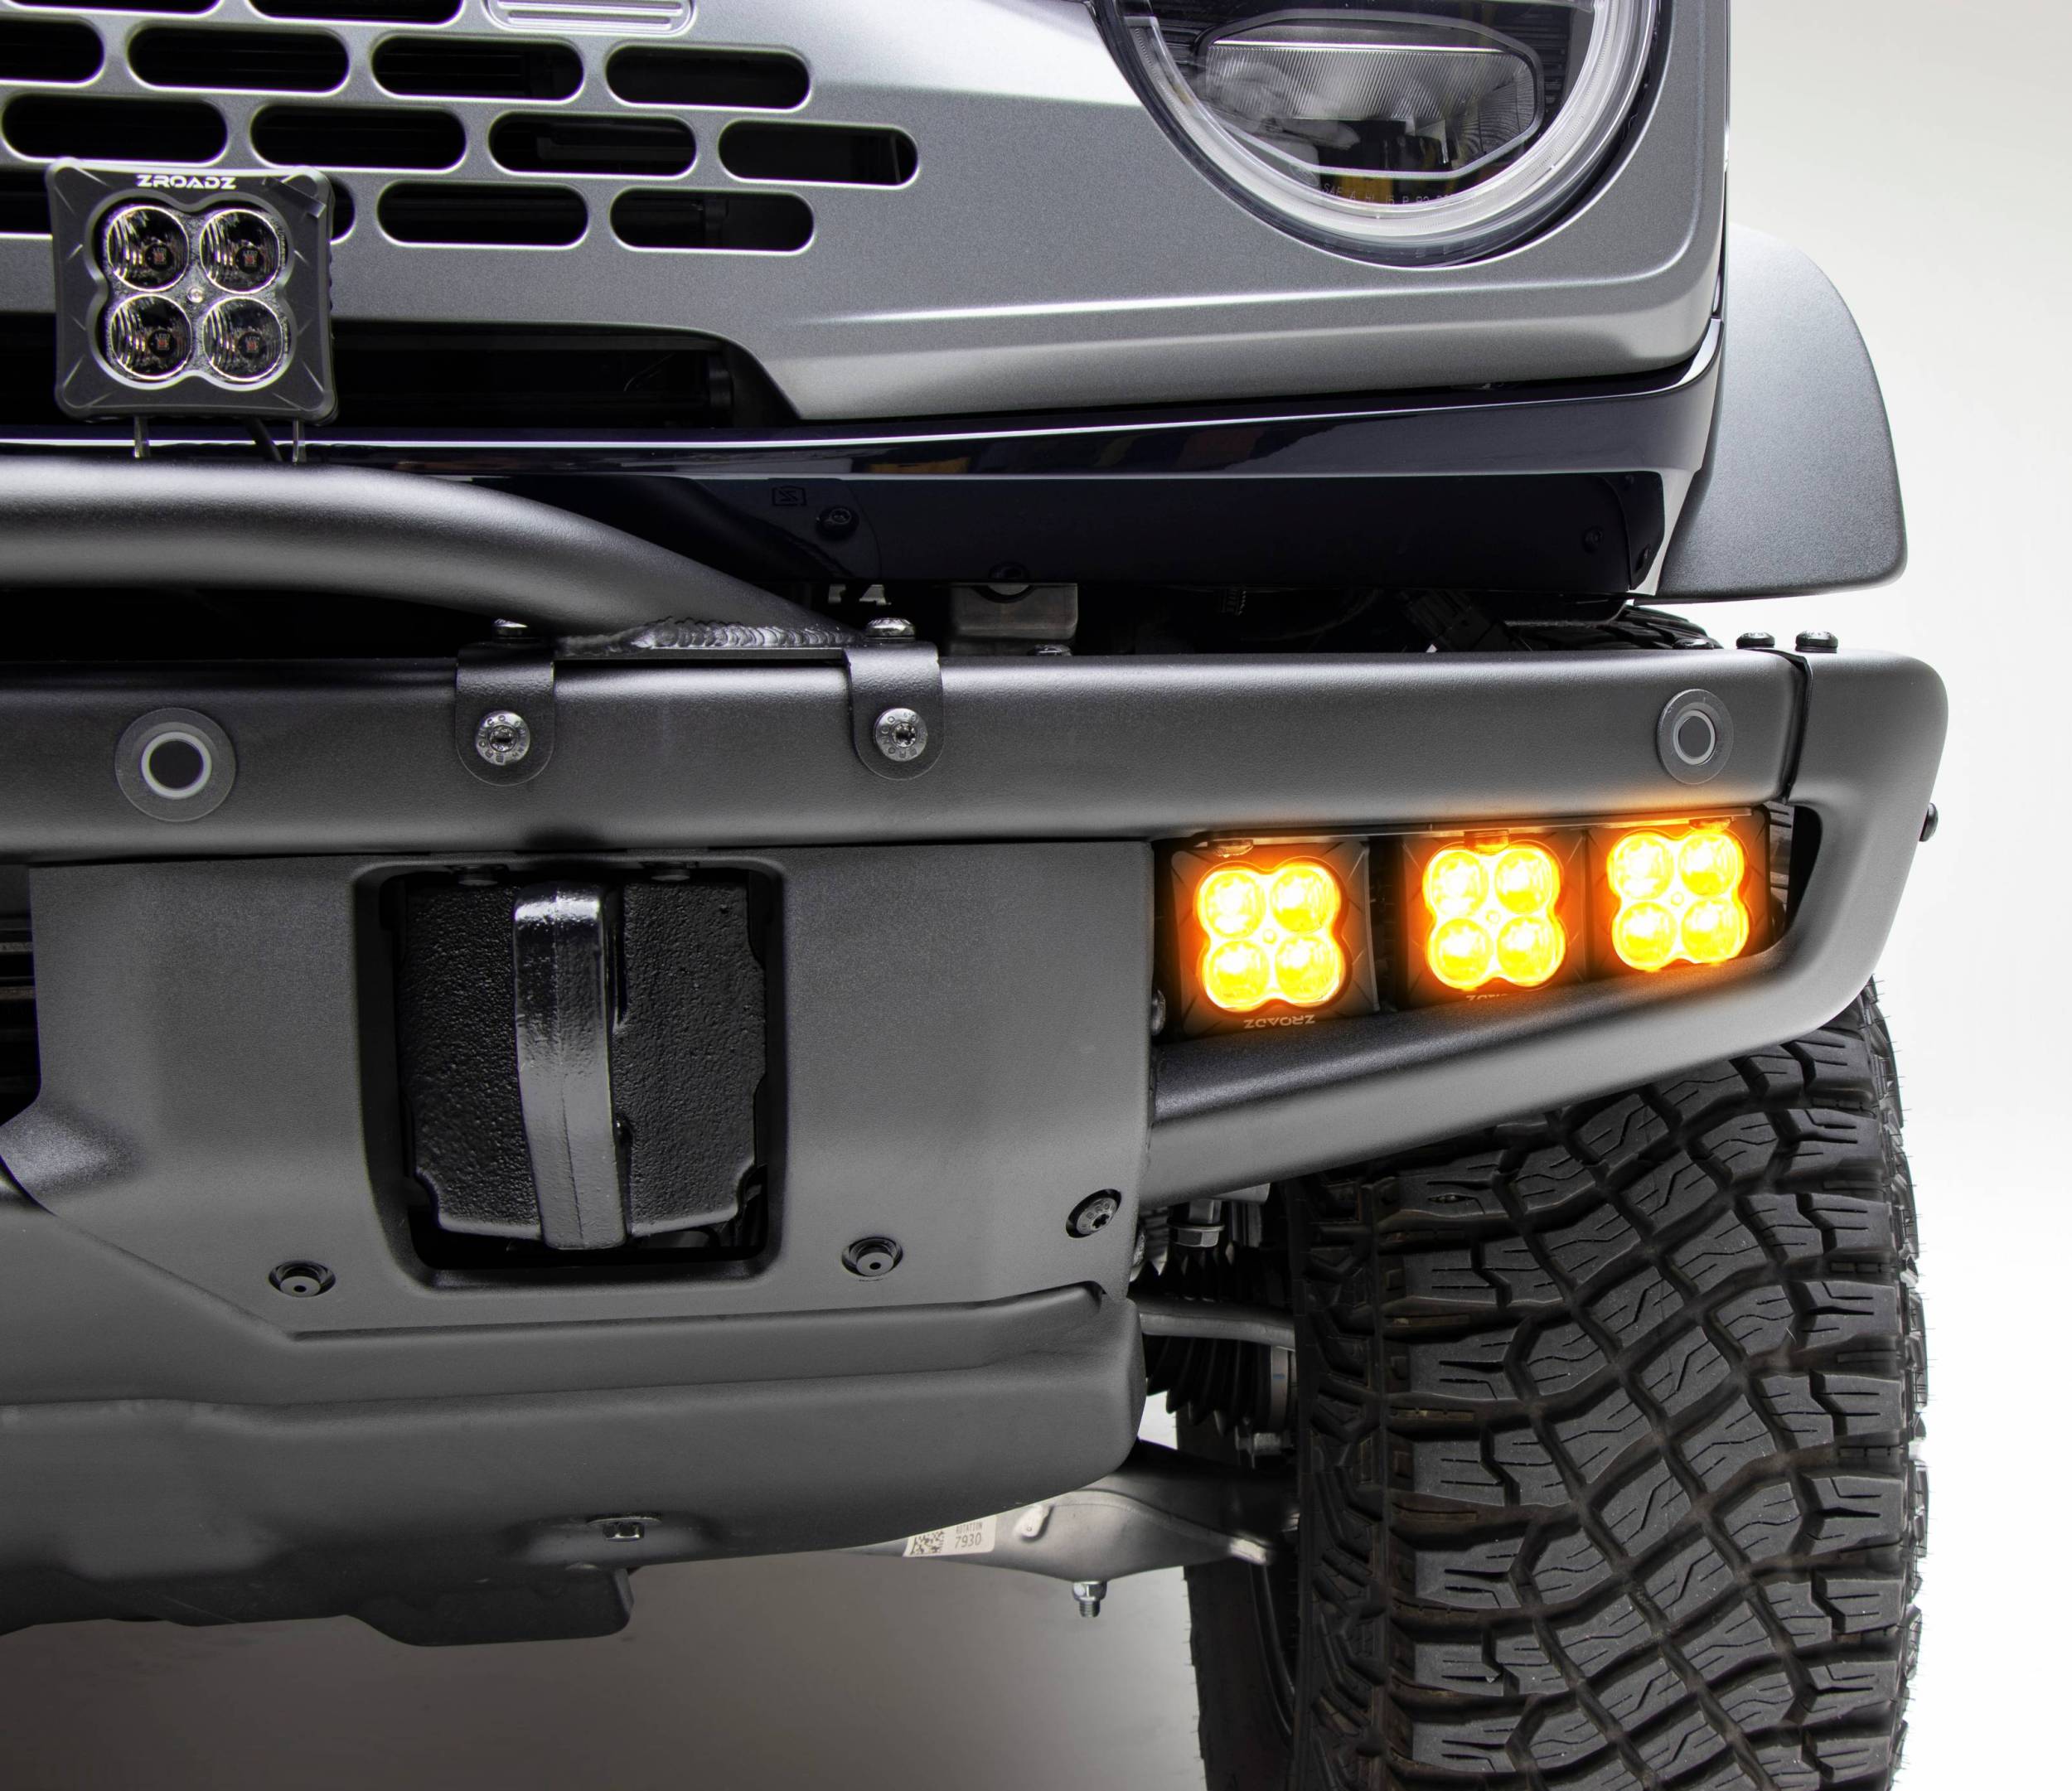 ZROADZ OFF ROAD PRODUCTS - 2021-2023 Ford Bronco Front Bumper Fog LED KIT, Includes (6) 3 inch ZROADZ Amber LED Pod Lights - Part # Z325401-KITA